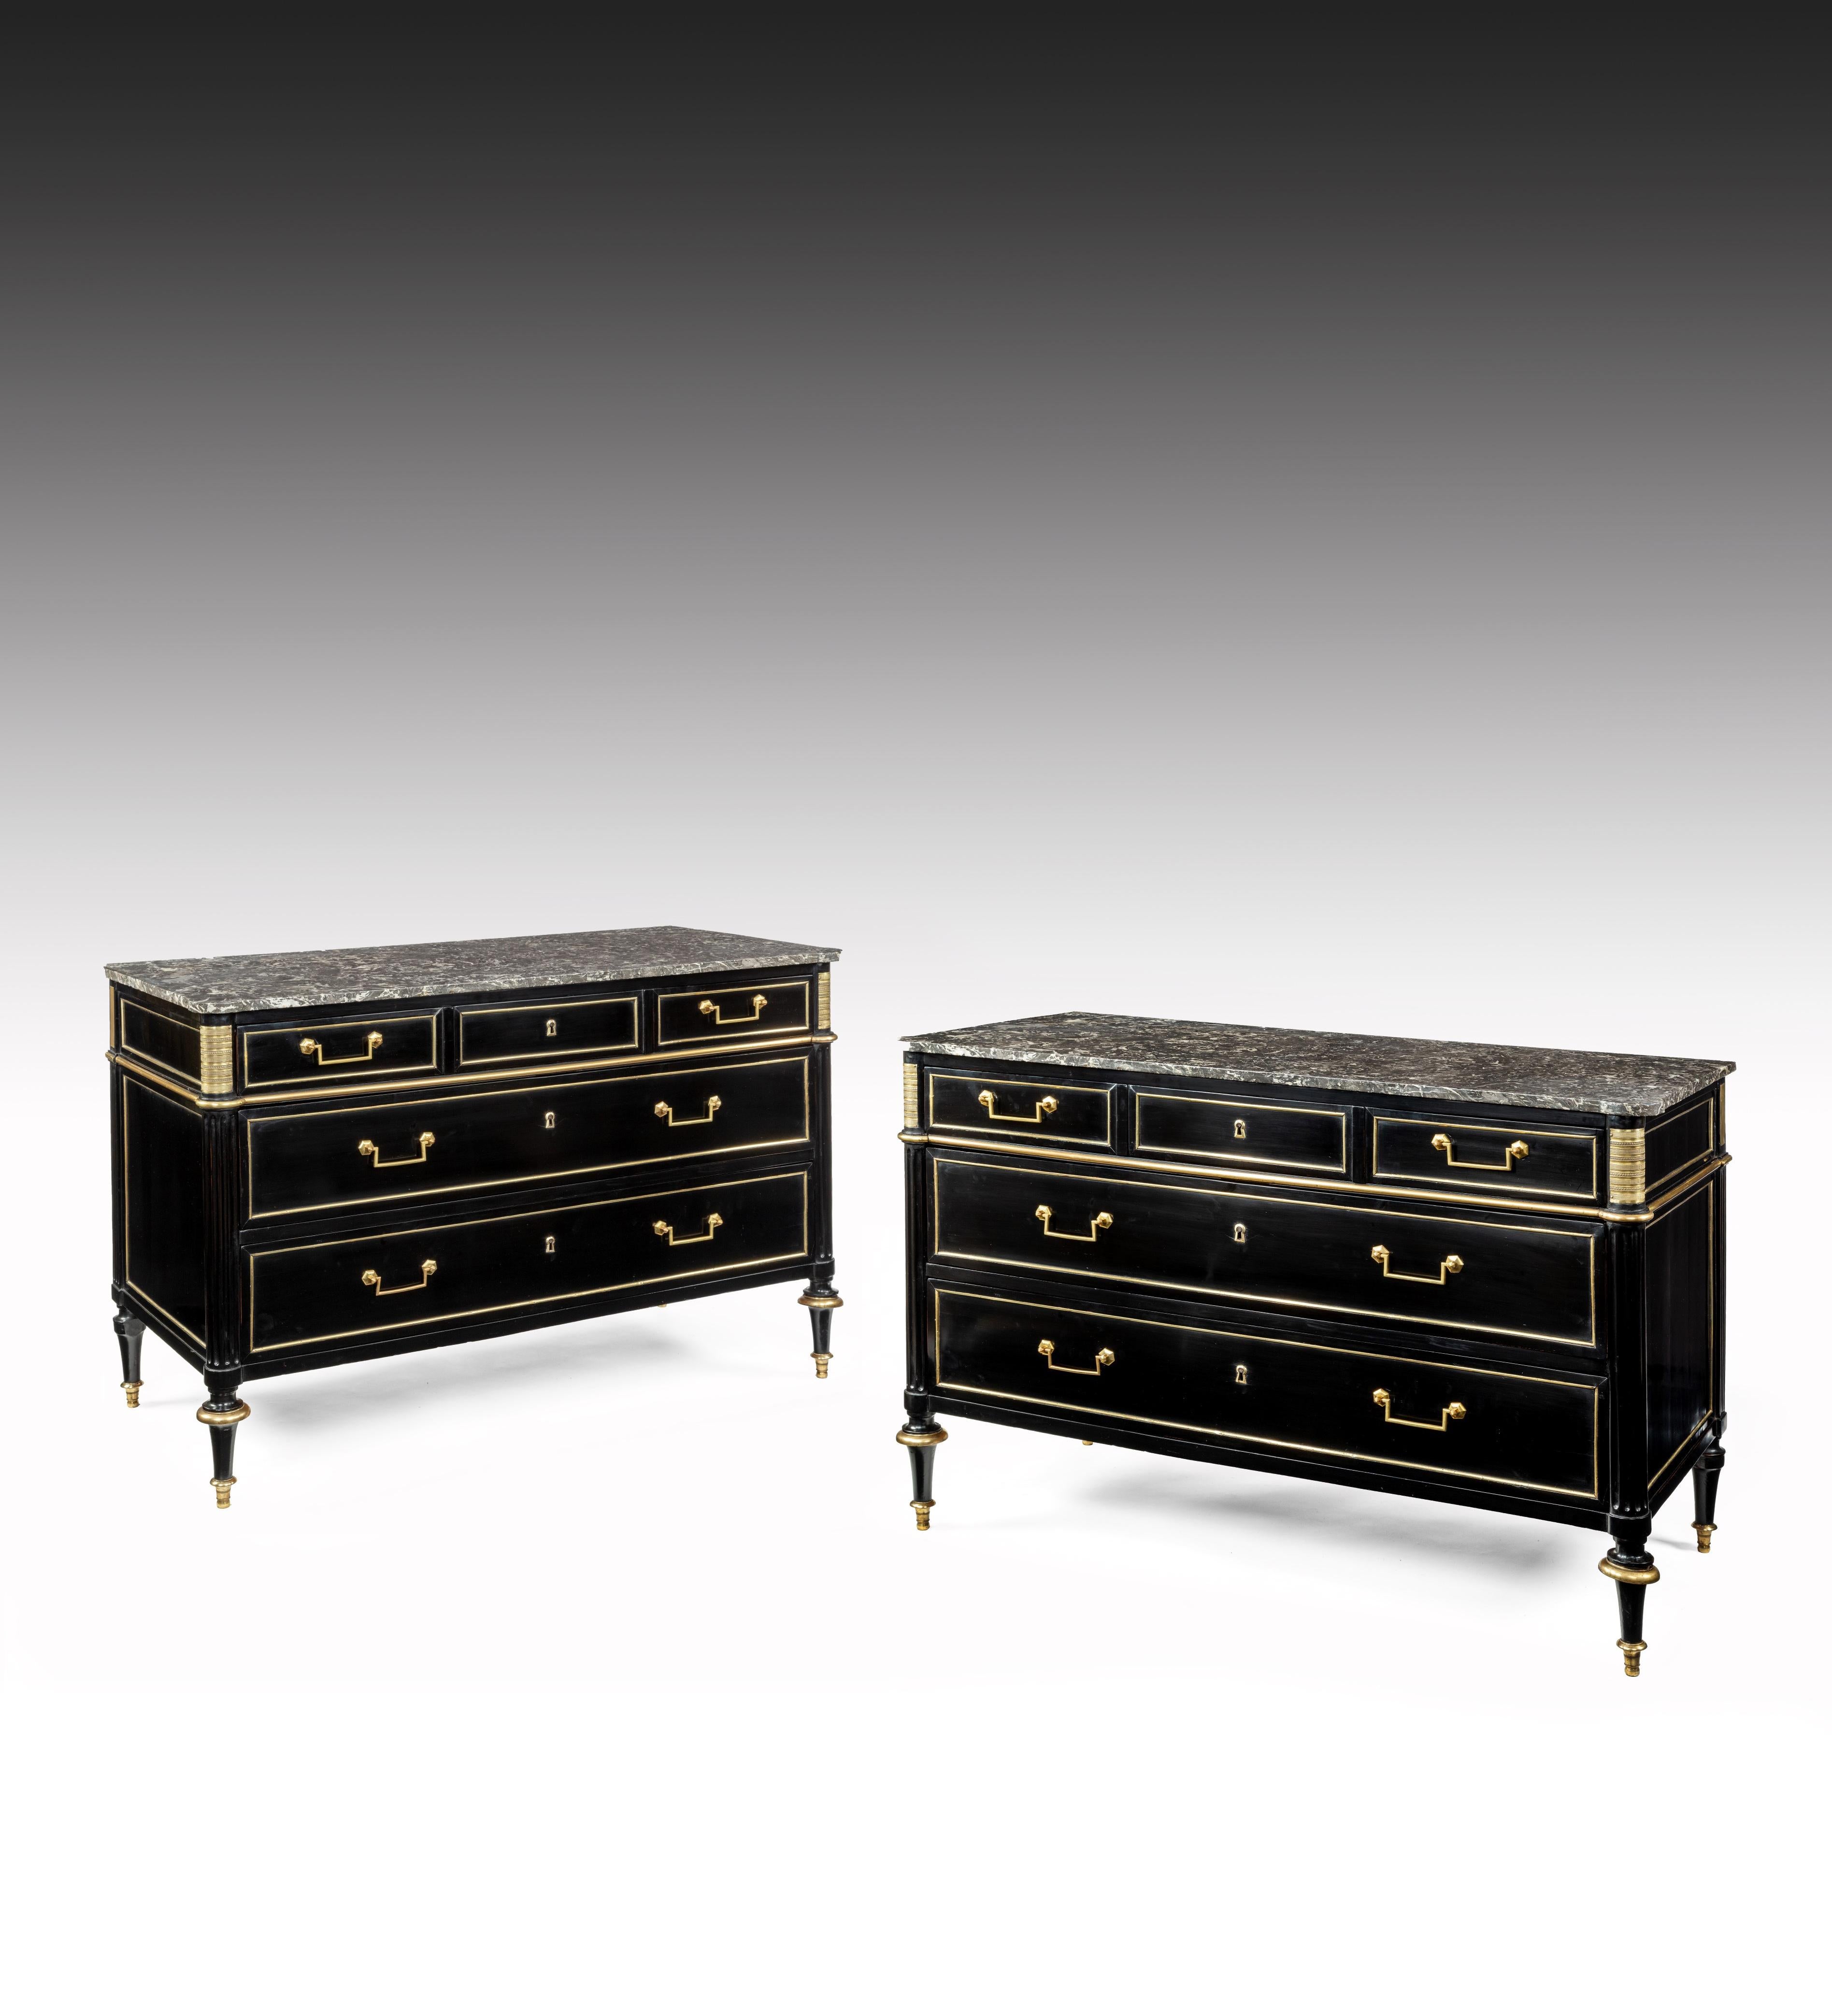 A stunning and decorative pair of French Directoire period ebonised and brass mounted marble topped commodes.

French, circa 1800.

A fine quality closely matched pair of late 18th-early 19th century ebonised Directoire commodes with ‘Gris St